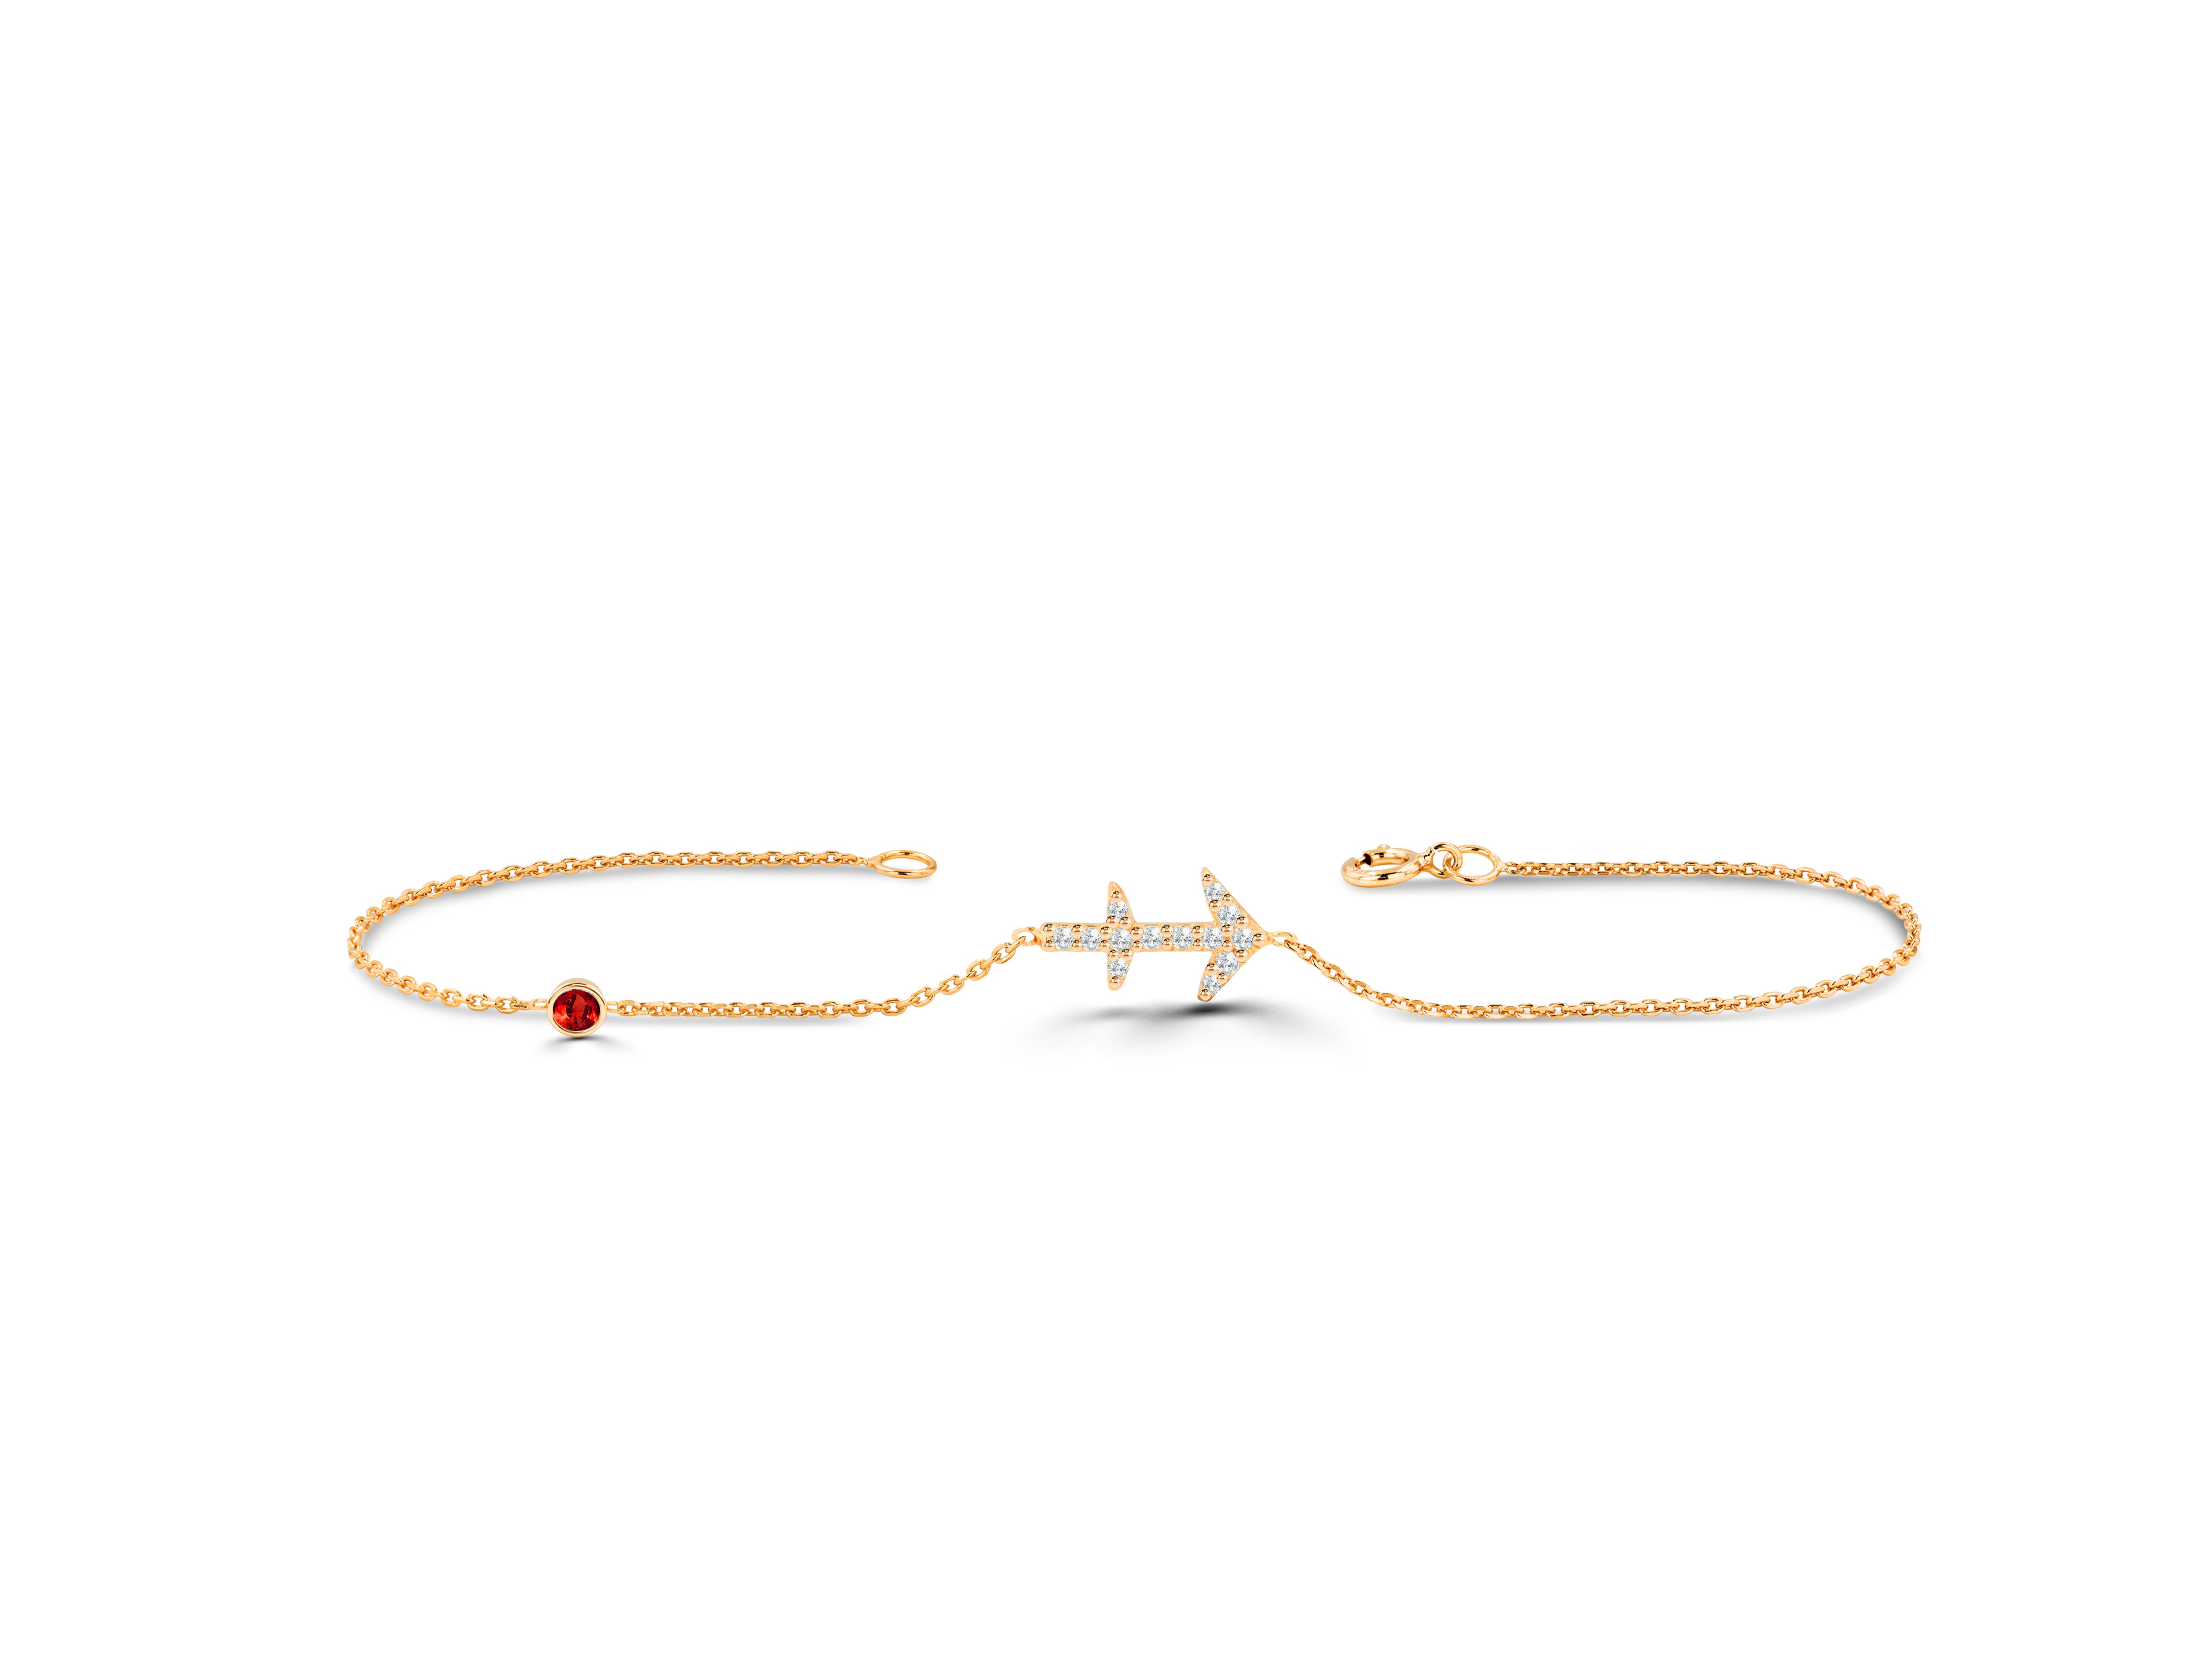 0.14 Carat diamond Sagittarius bracelet with customizable gemstone is the bracelet to be worn every day to define your unique self. You can choose precious stones like ruby, sapphire, and emerald. This minimalist bracelet is perfect to wear every